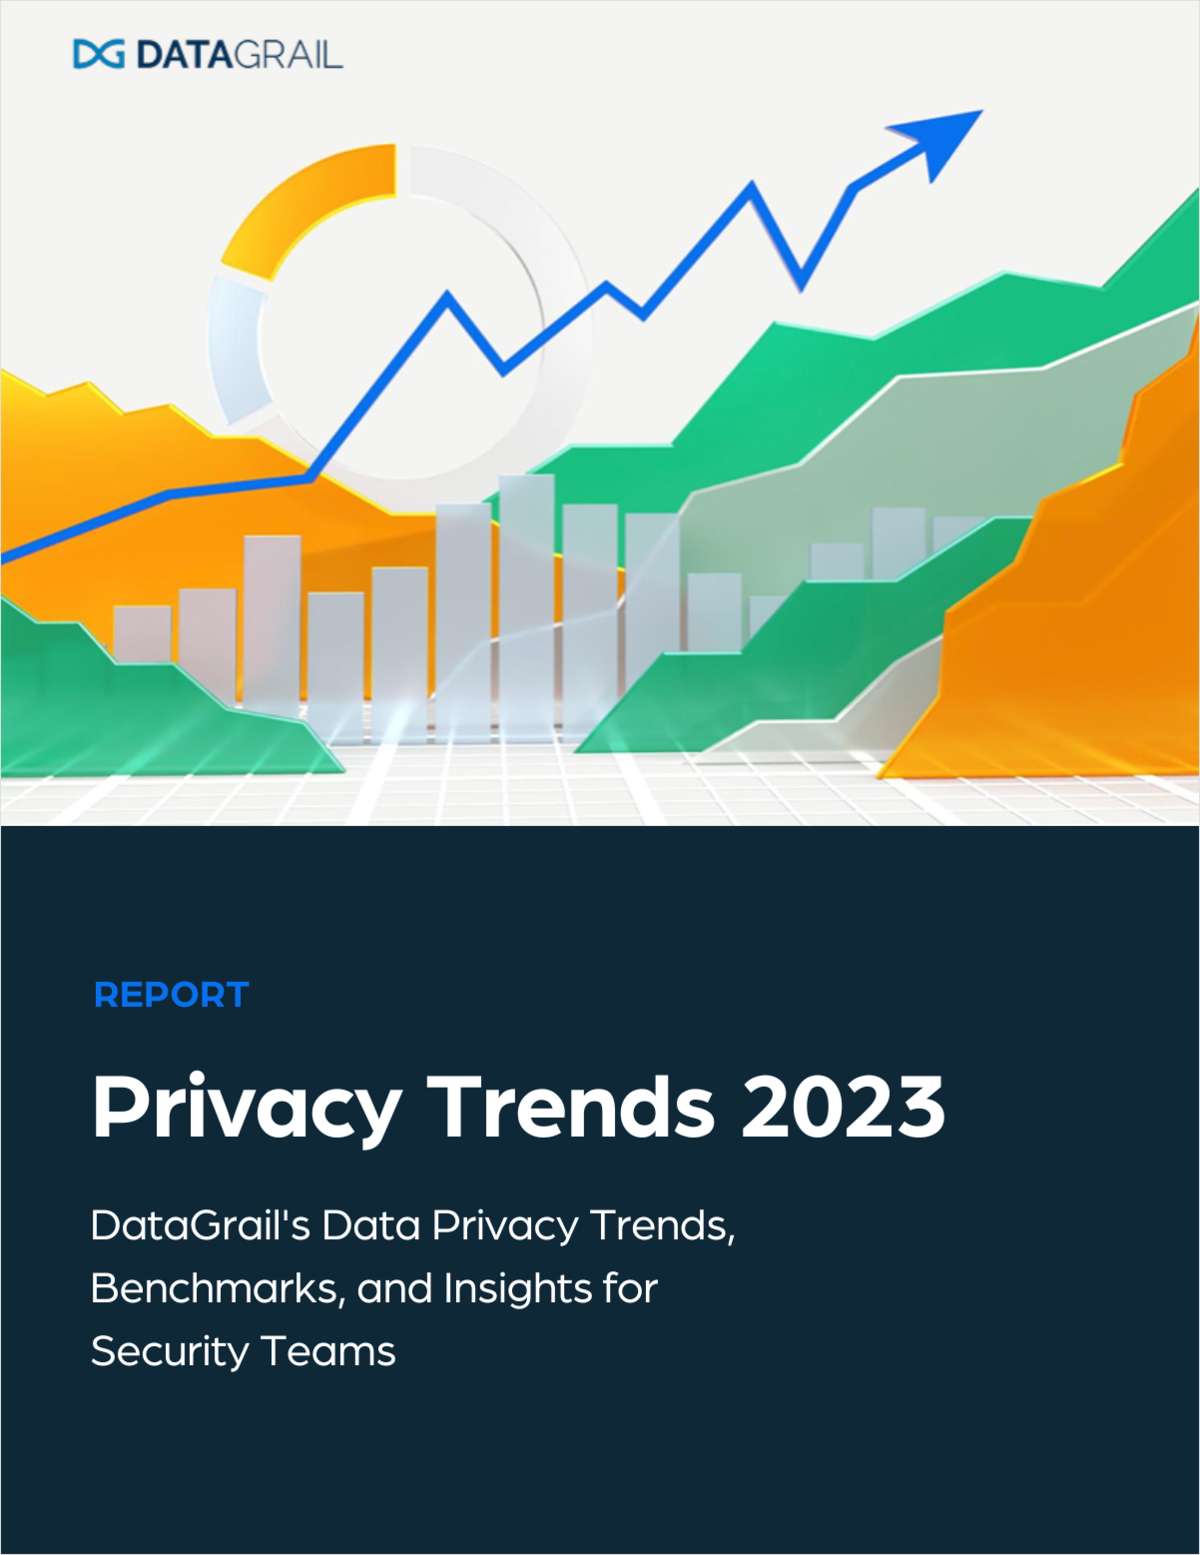  Privacy Trends for 2023: Benchmarks and Insights for Security Teams